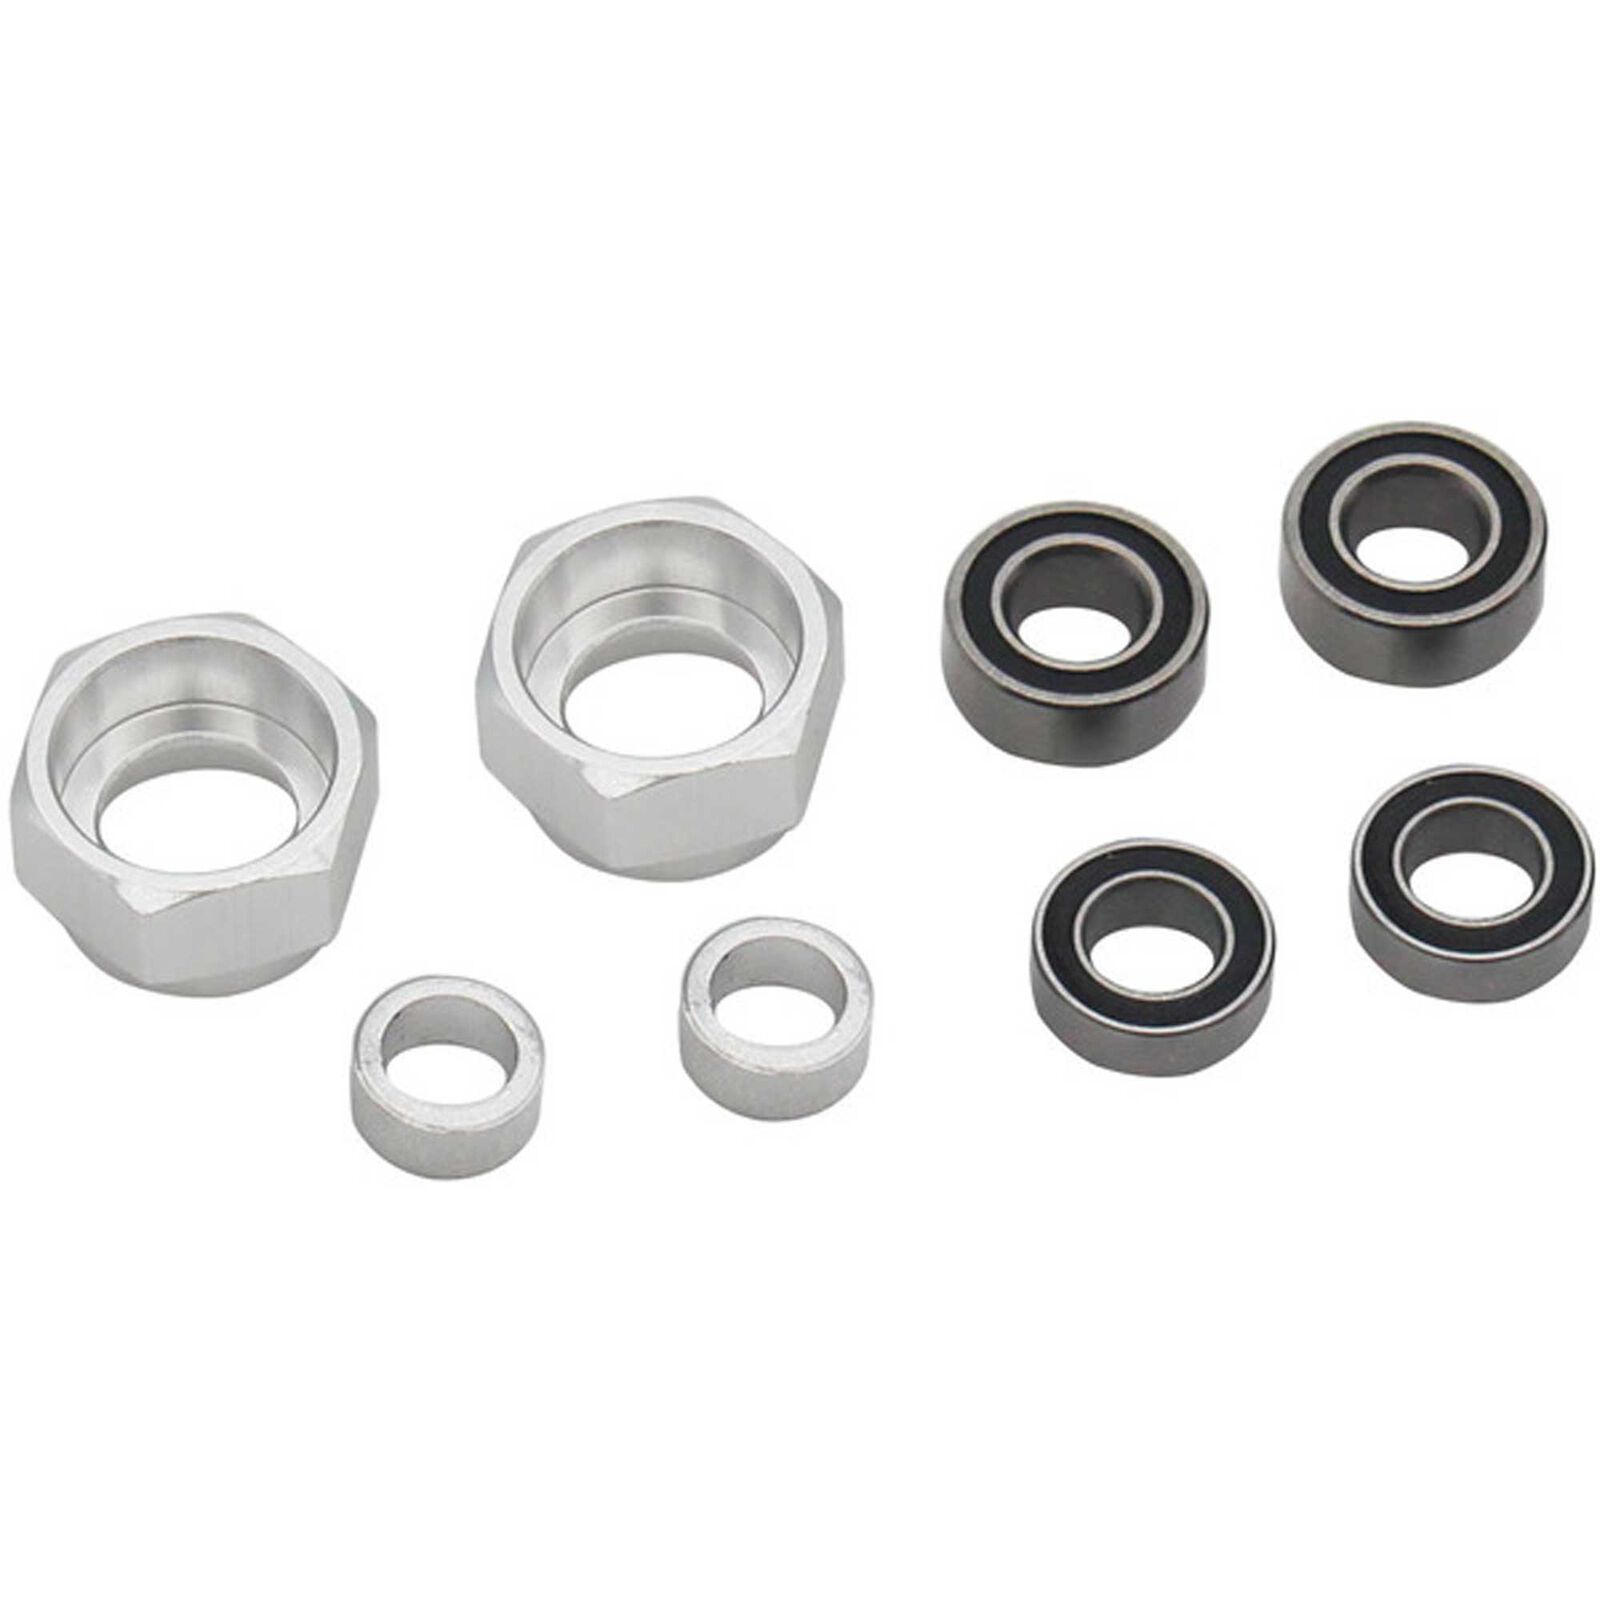 12 Hex Bearing Conversion Front Adapter